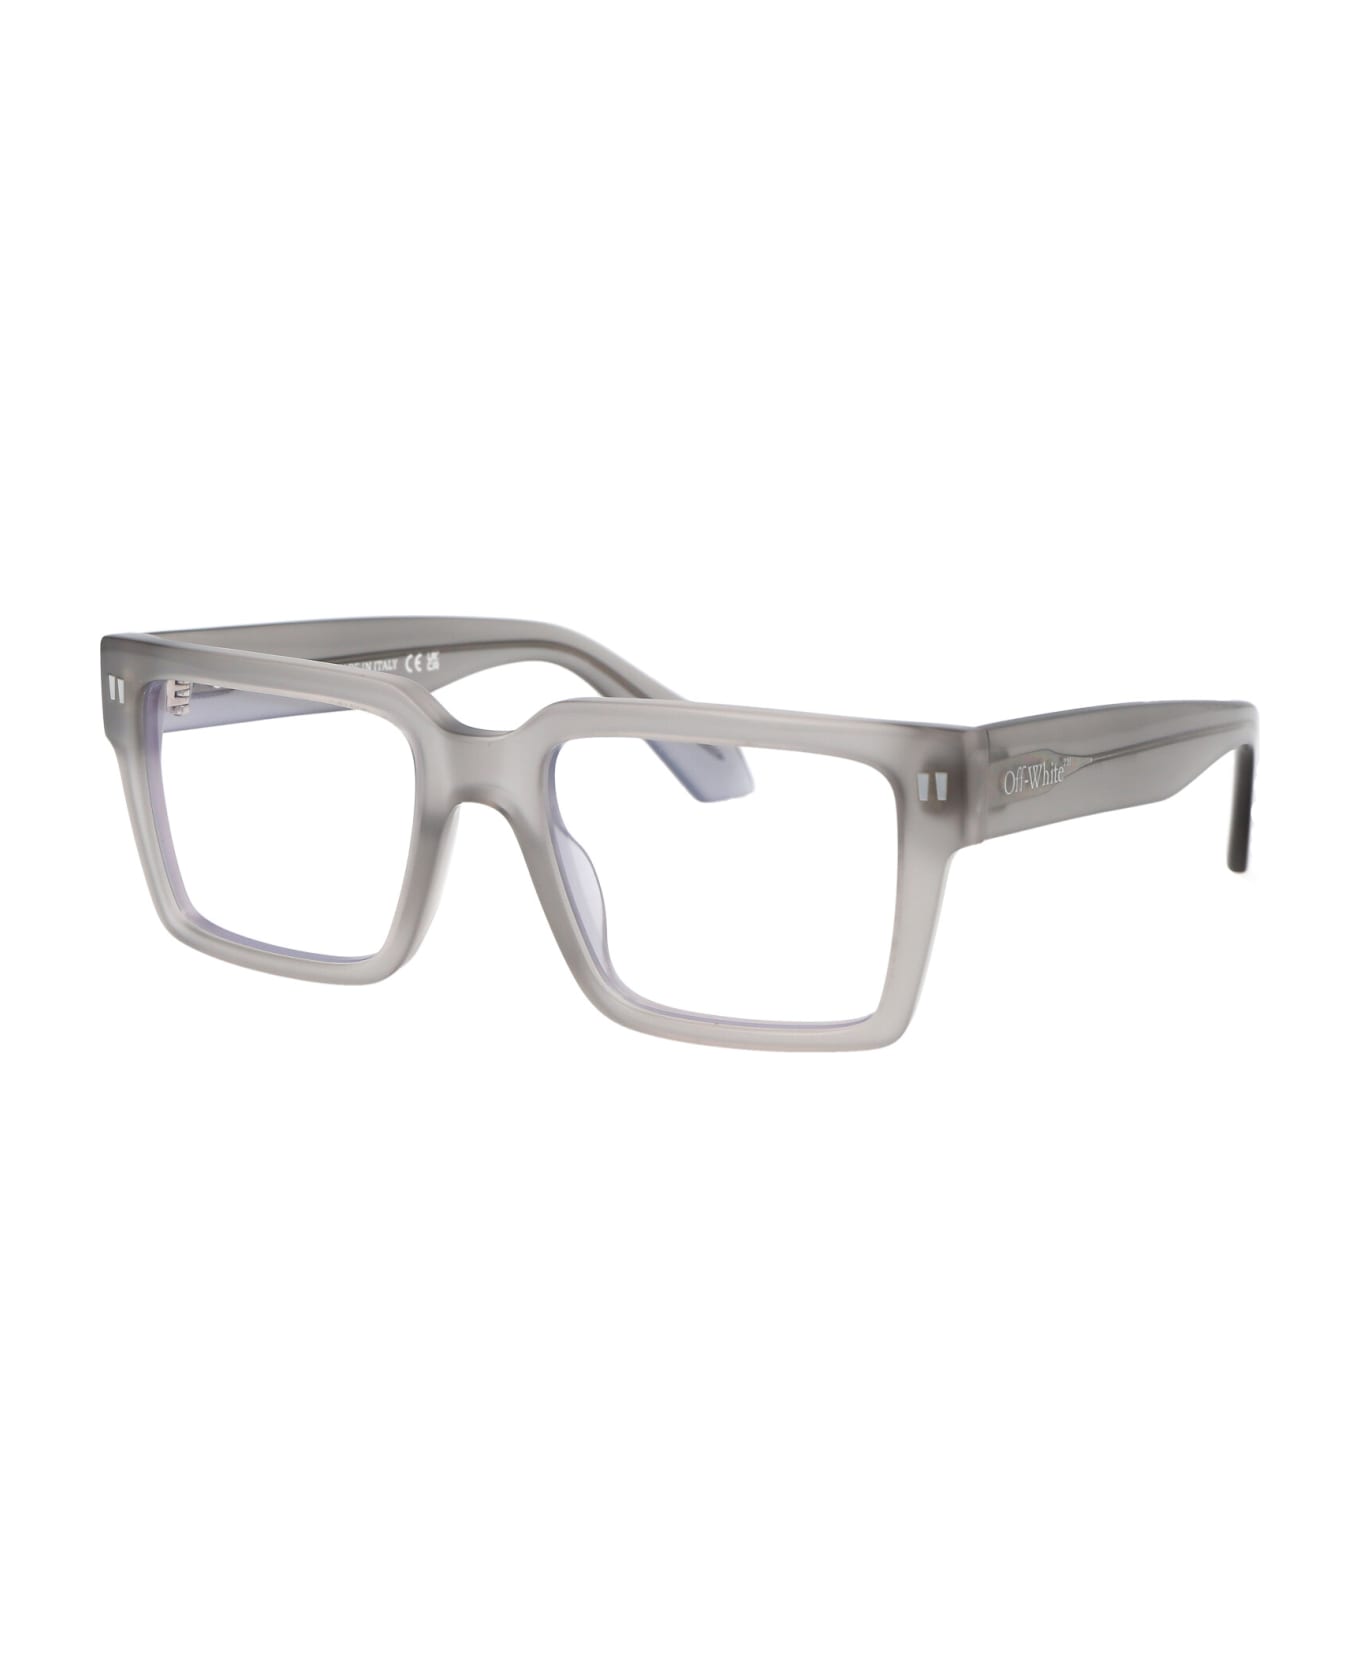 Off-White Optical Style 54 Glasses - 0900 GREY 